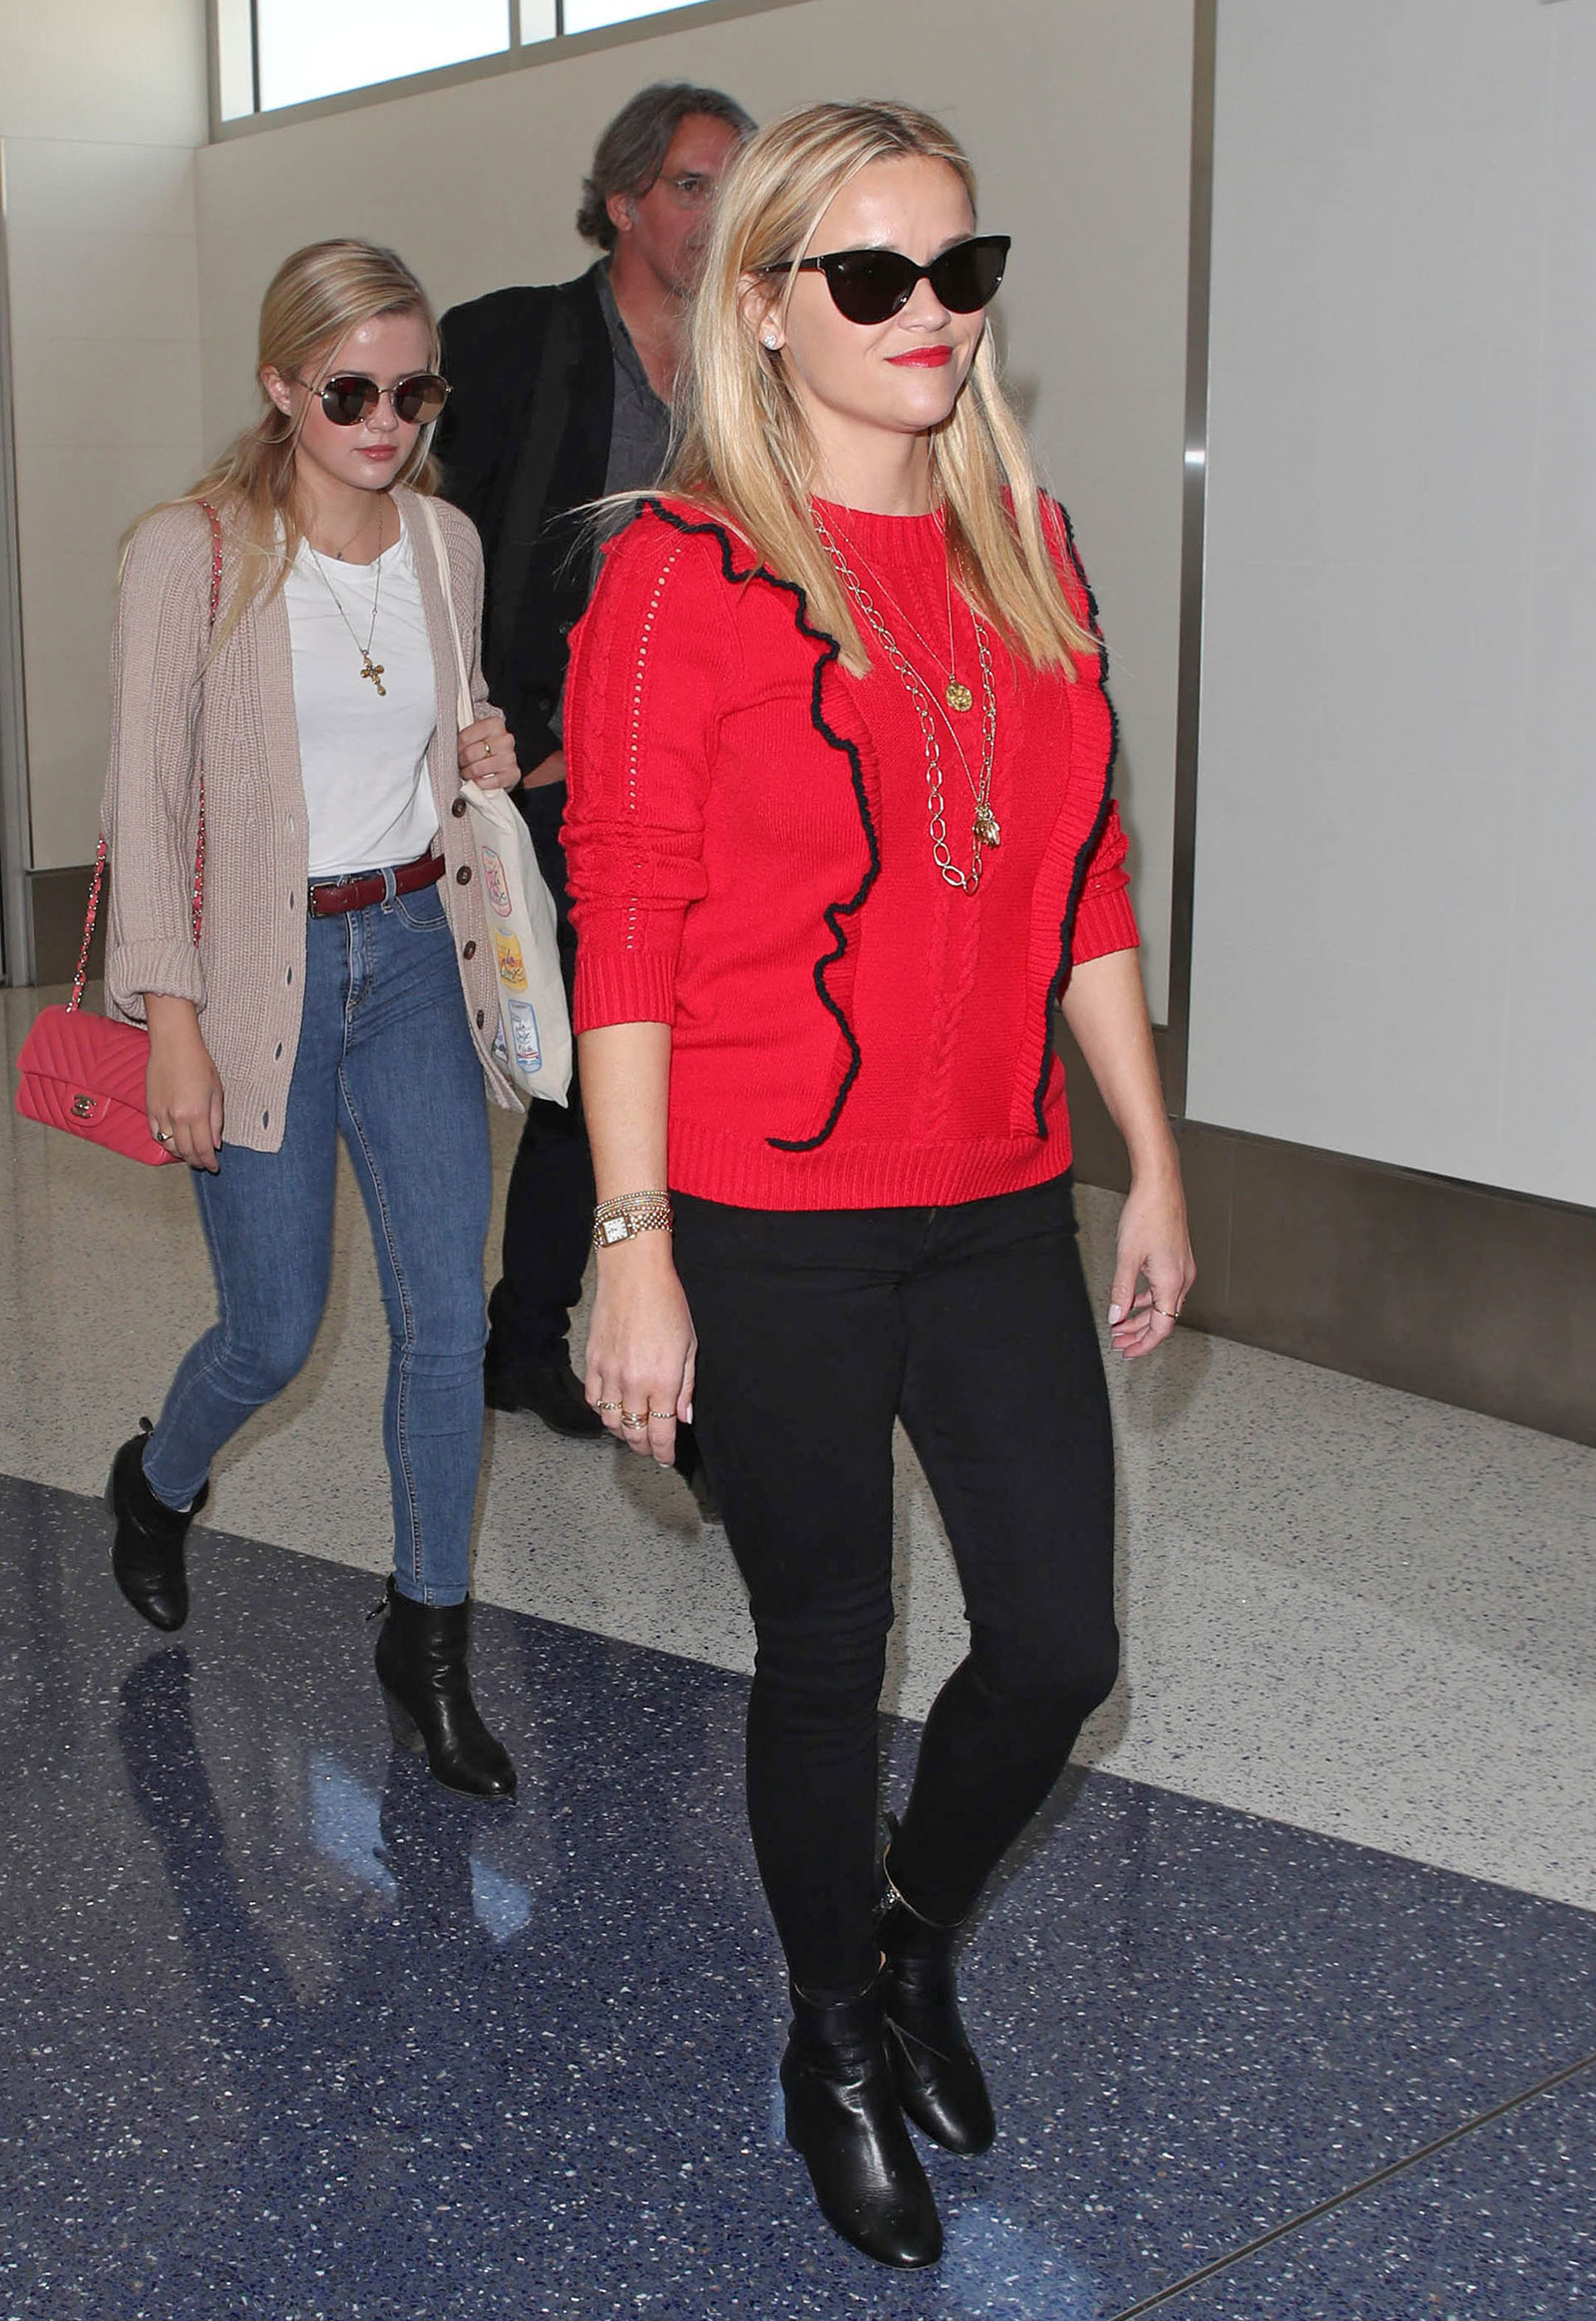 Reese Witherspoon wears a red ruffle sweater by Draper James and carries a Louis Vuitton bag while traveling through LAX.